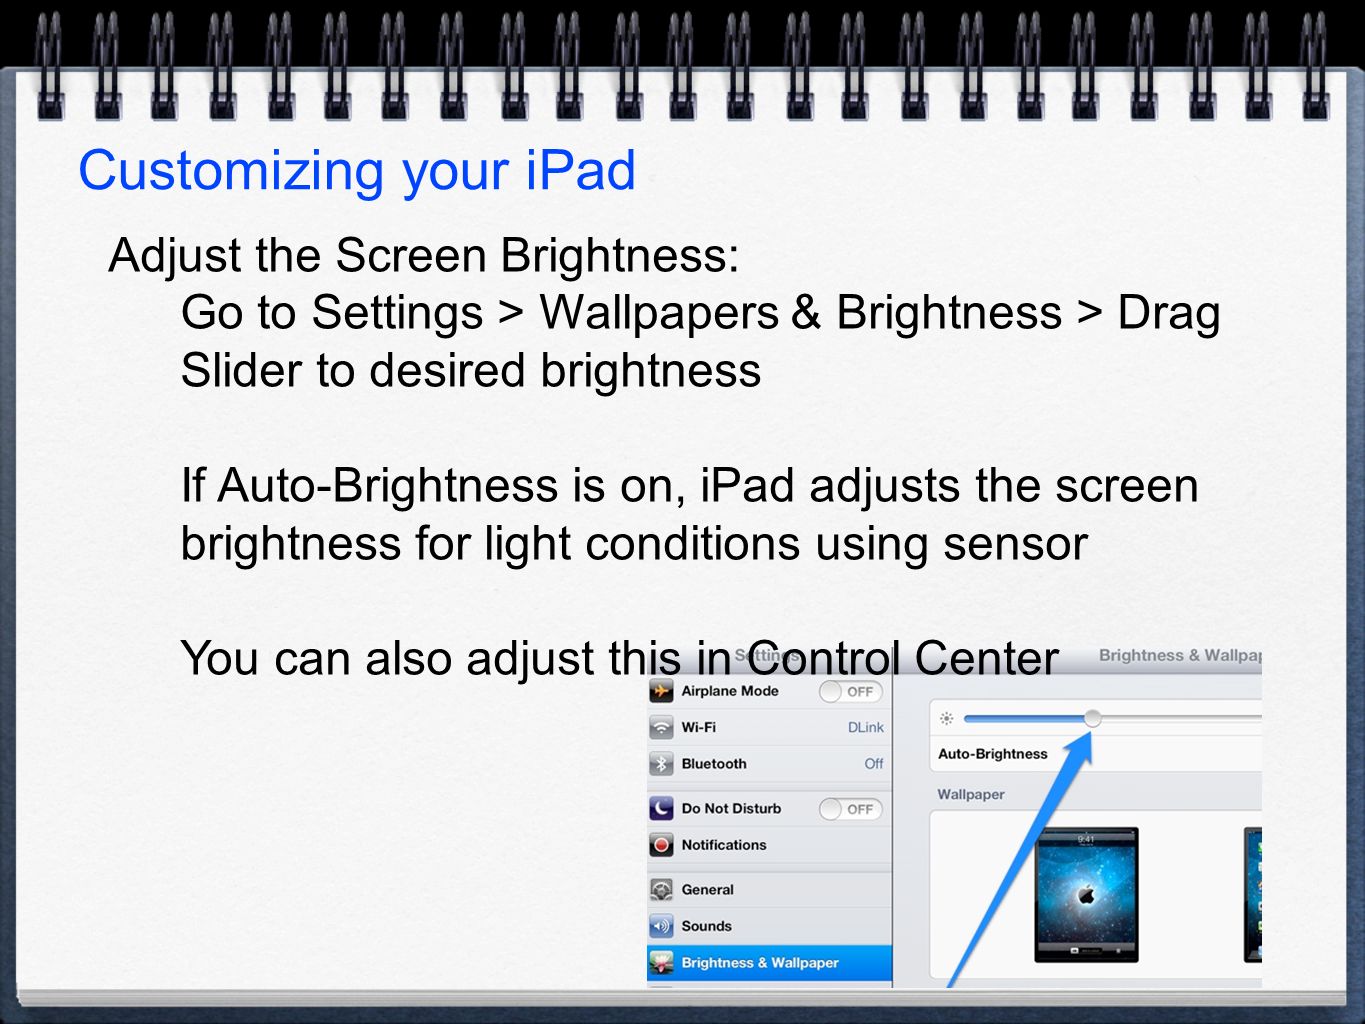 Customizing your iPad Adjust the Screen Brightness: Go to Settings > Wallpapers & Brightness > Drag Slider to desired brightness If Auto-Brightness is on, iPad adjusts the screen brightness for light conditions using sensor You can also adjust this in Control Center